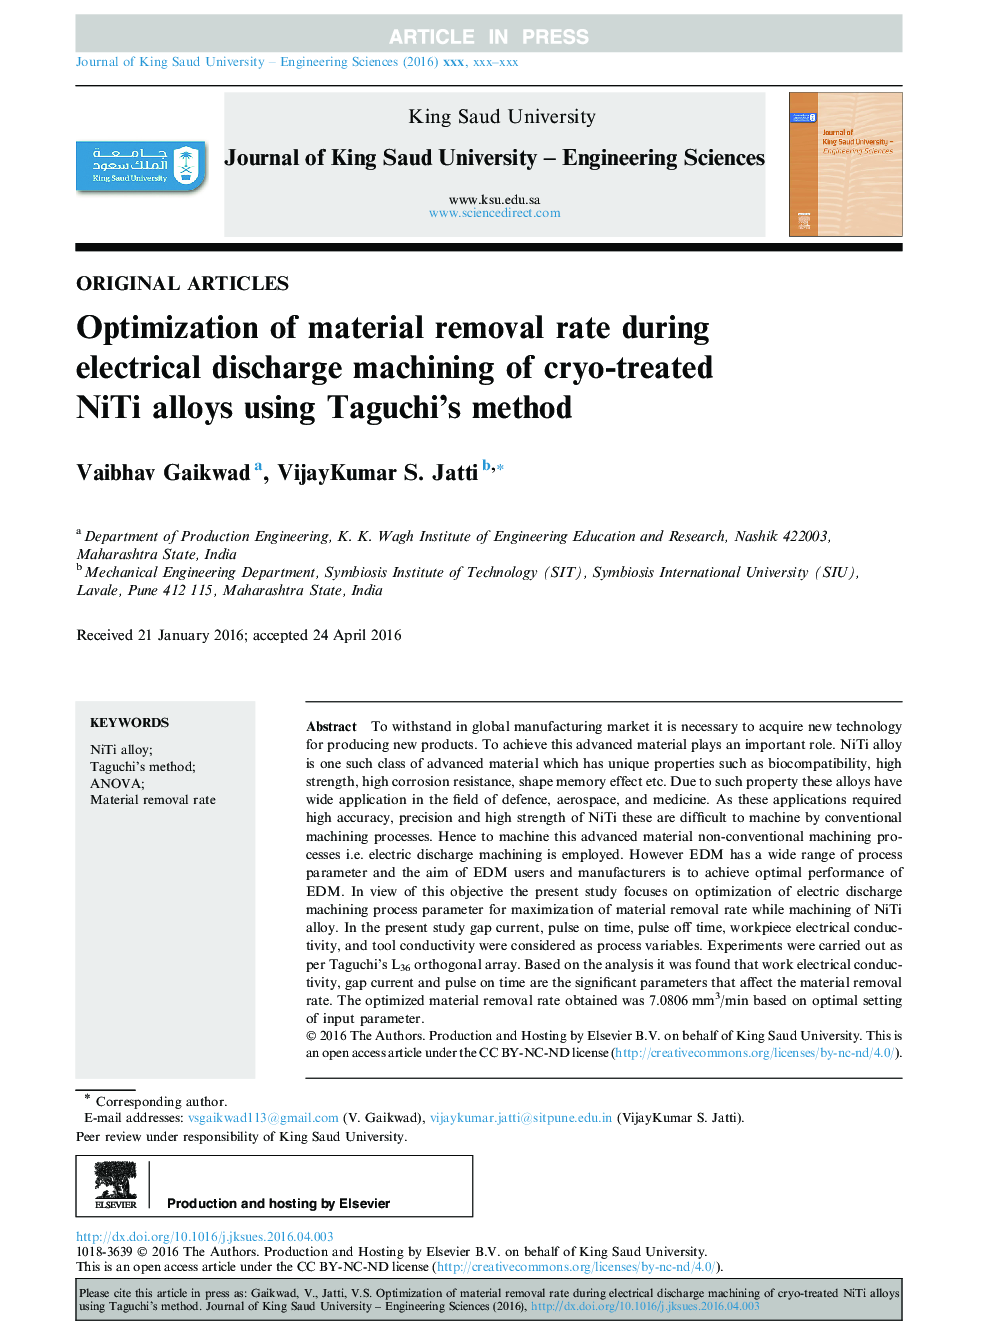 Optimization of material removal rate during electrical discharge machining of cryo-treated NiTi alloys using Taguchi's method